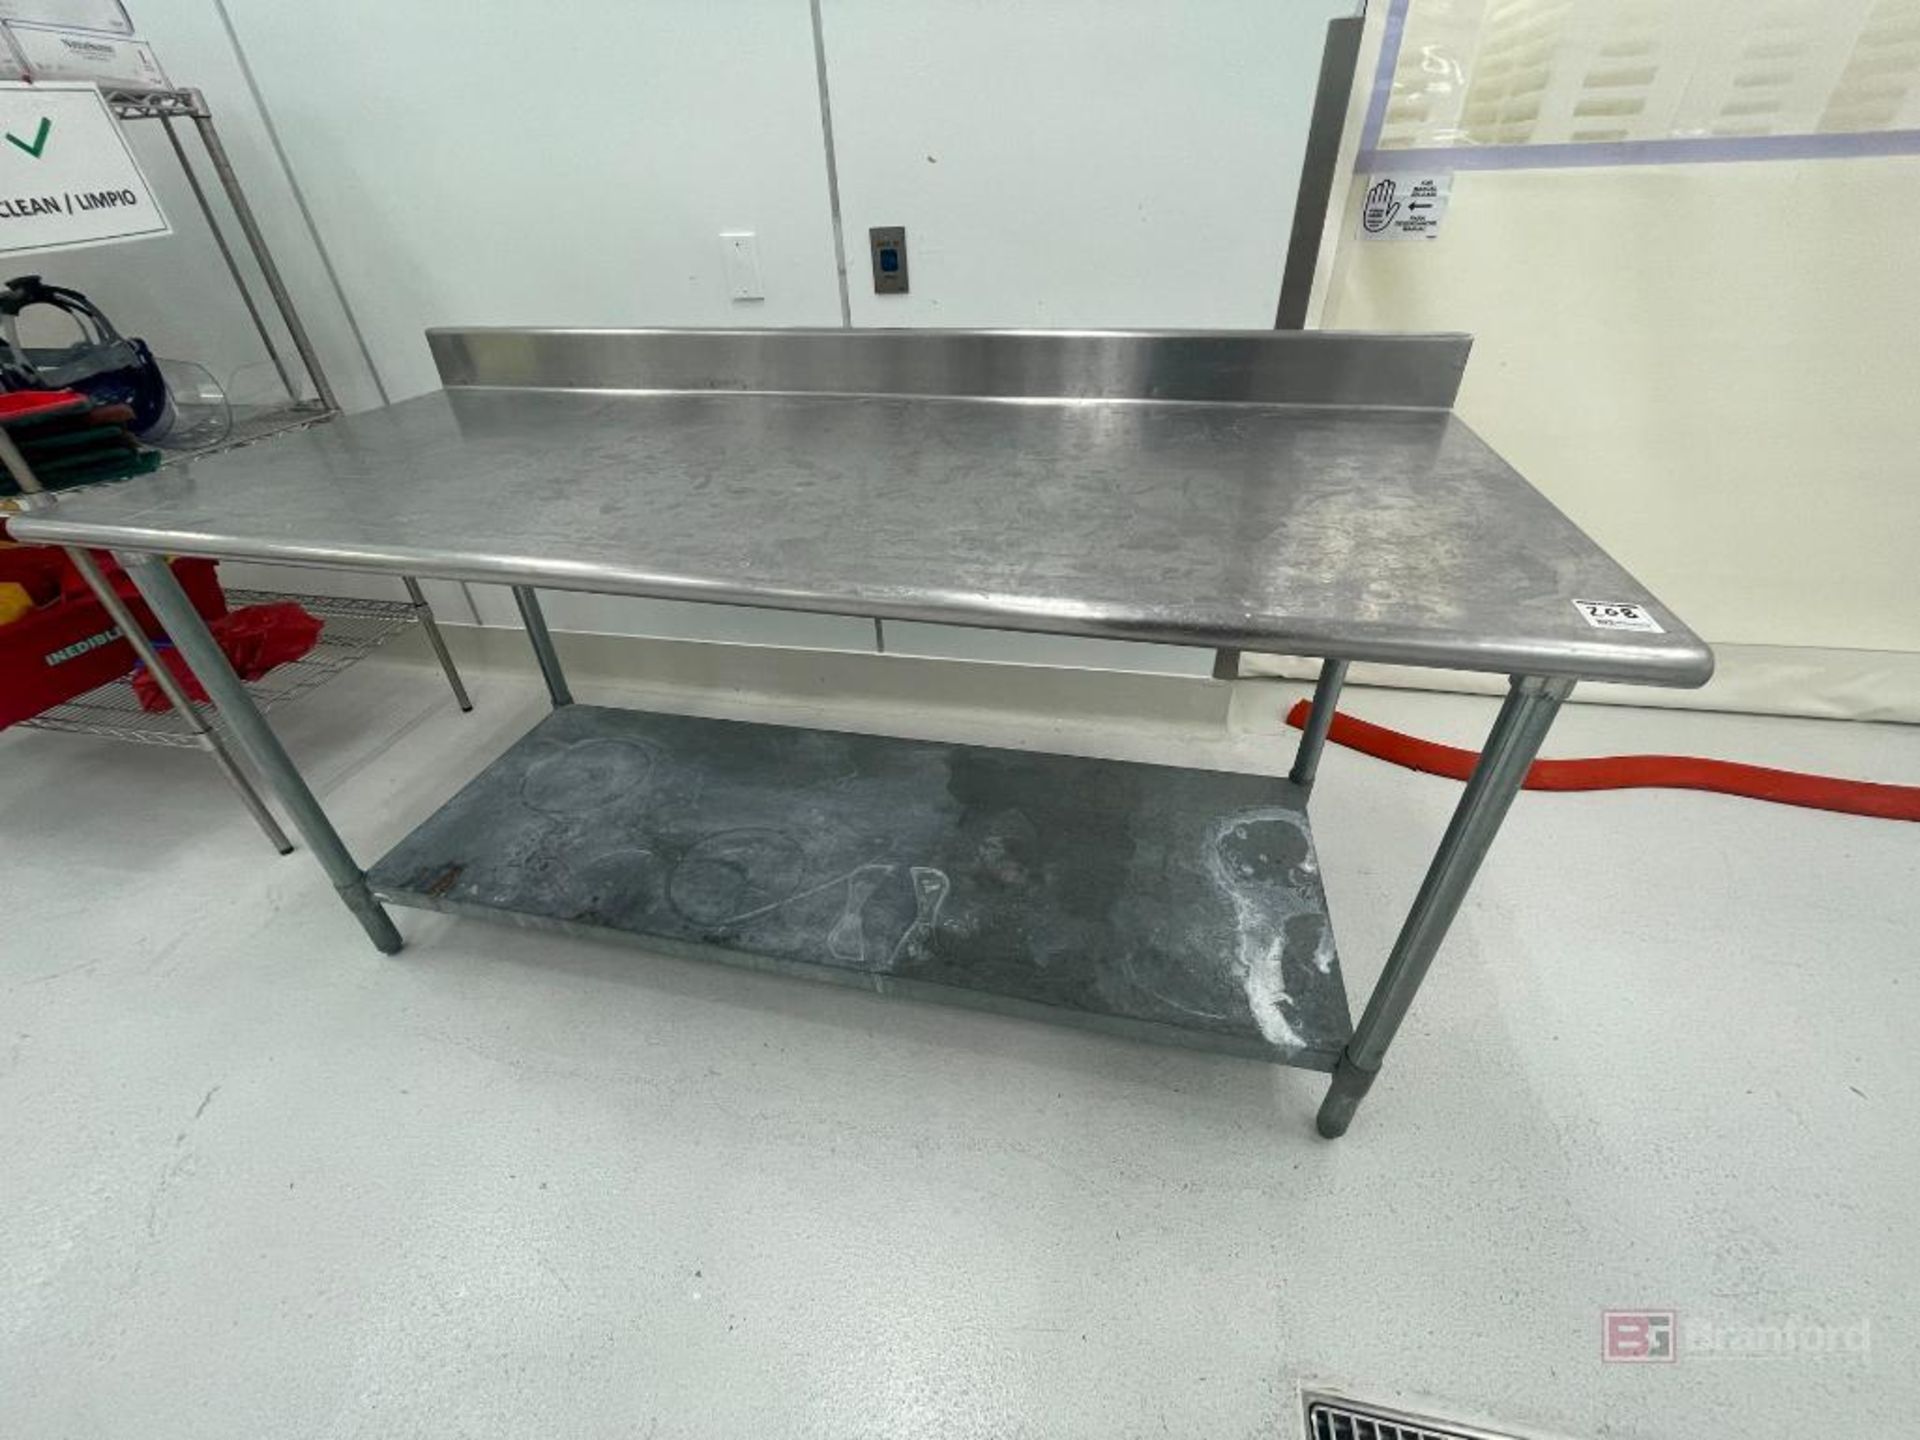 SS 2-tier lab bench and SS utility cart, ss platform - Image 6 of 6